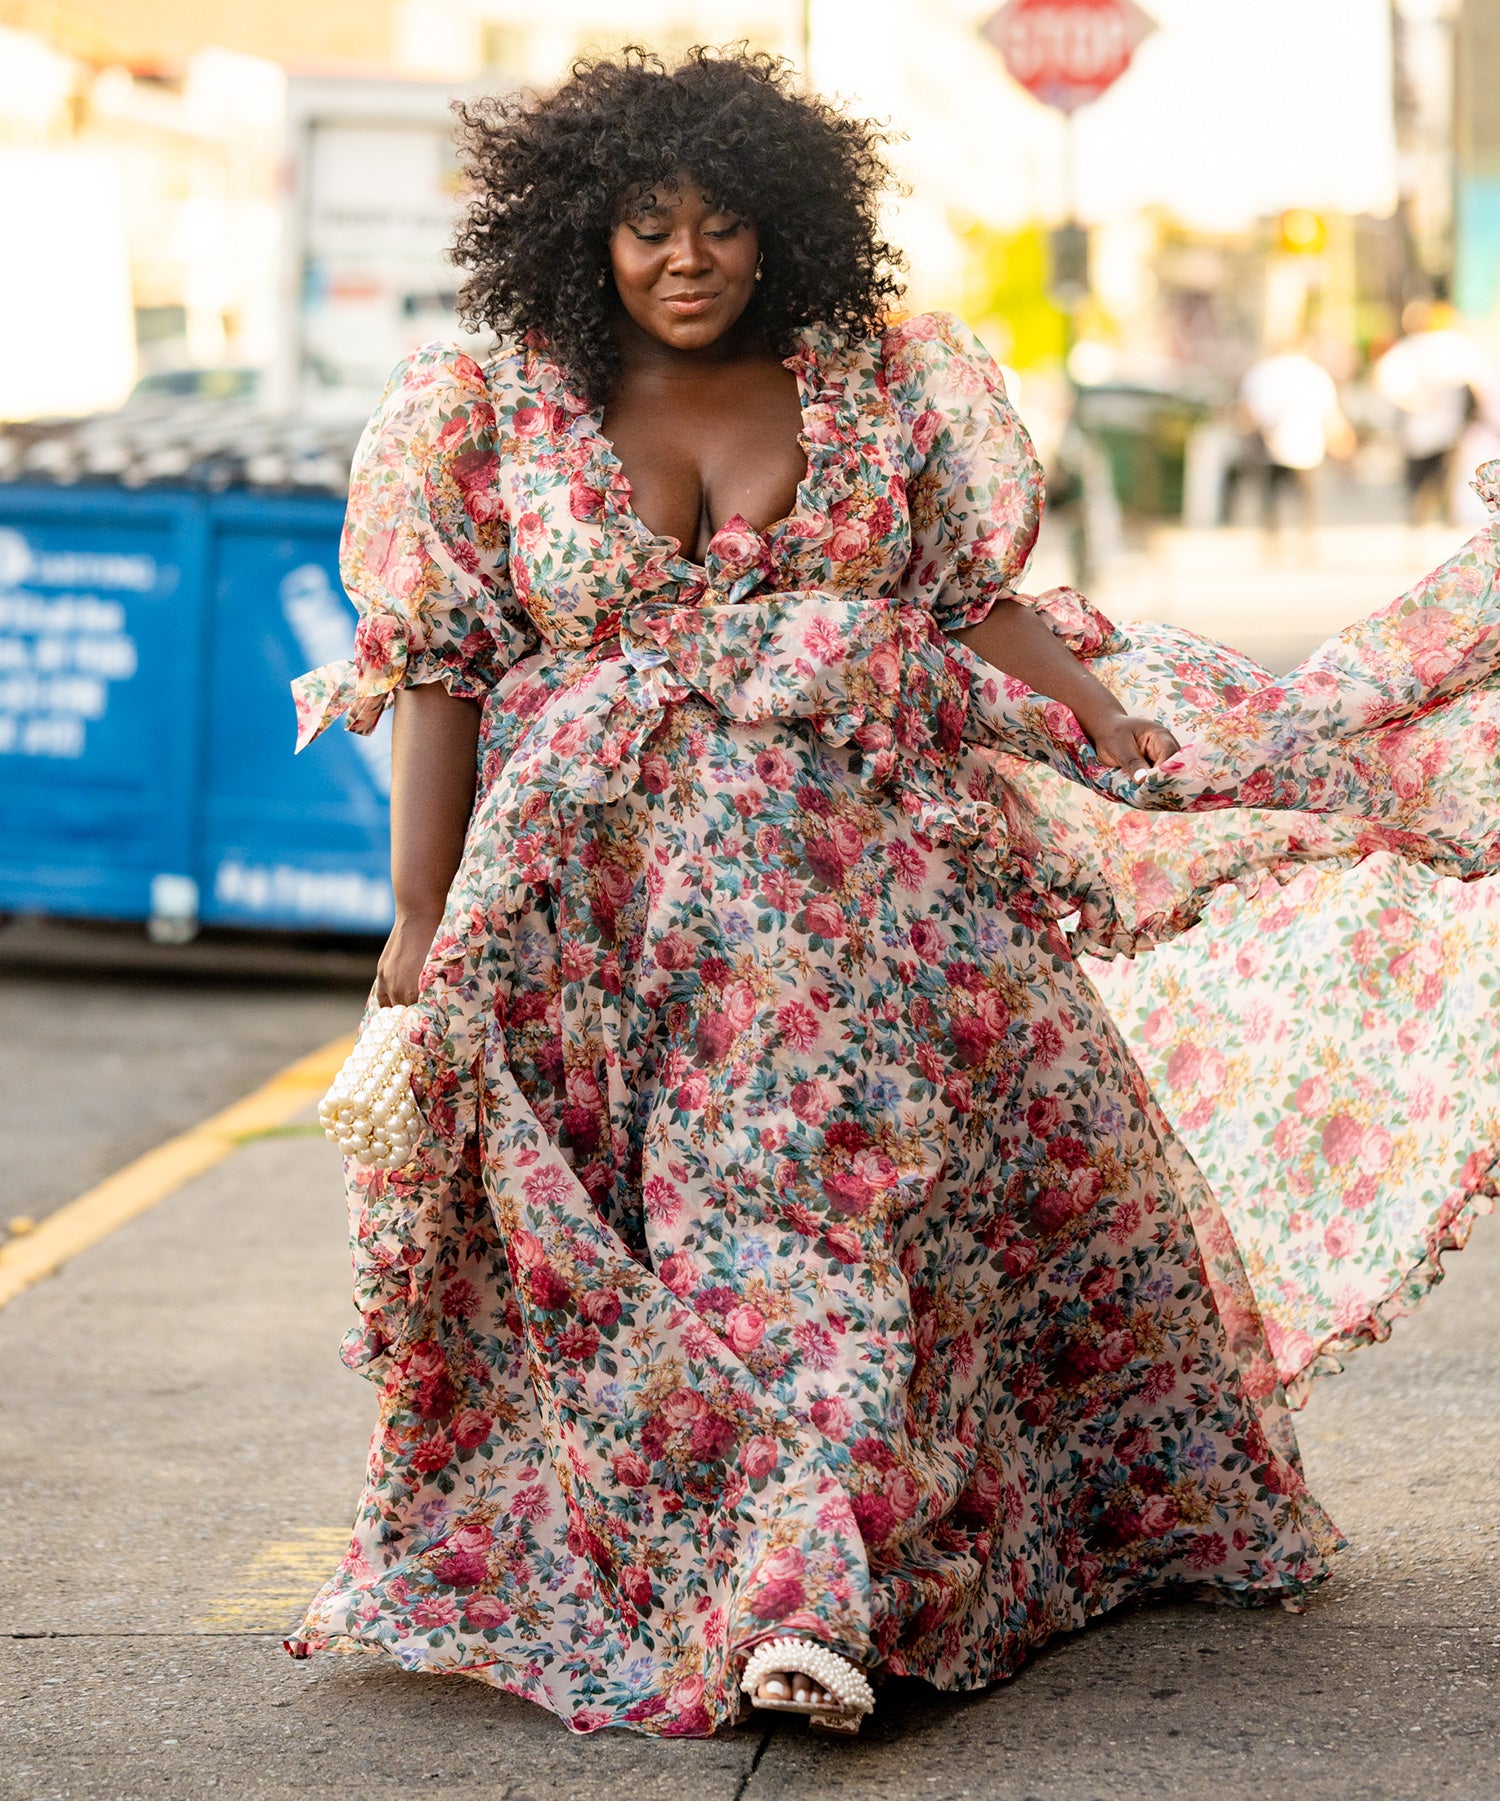 As A Plus-Size Woman, I've Been Taught Not To Wear